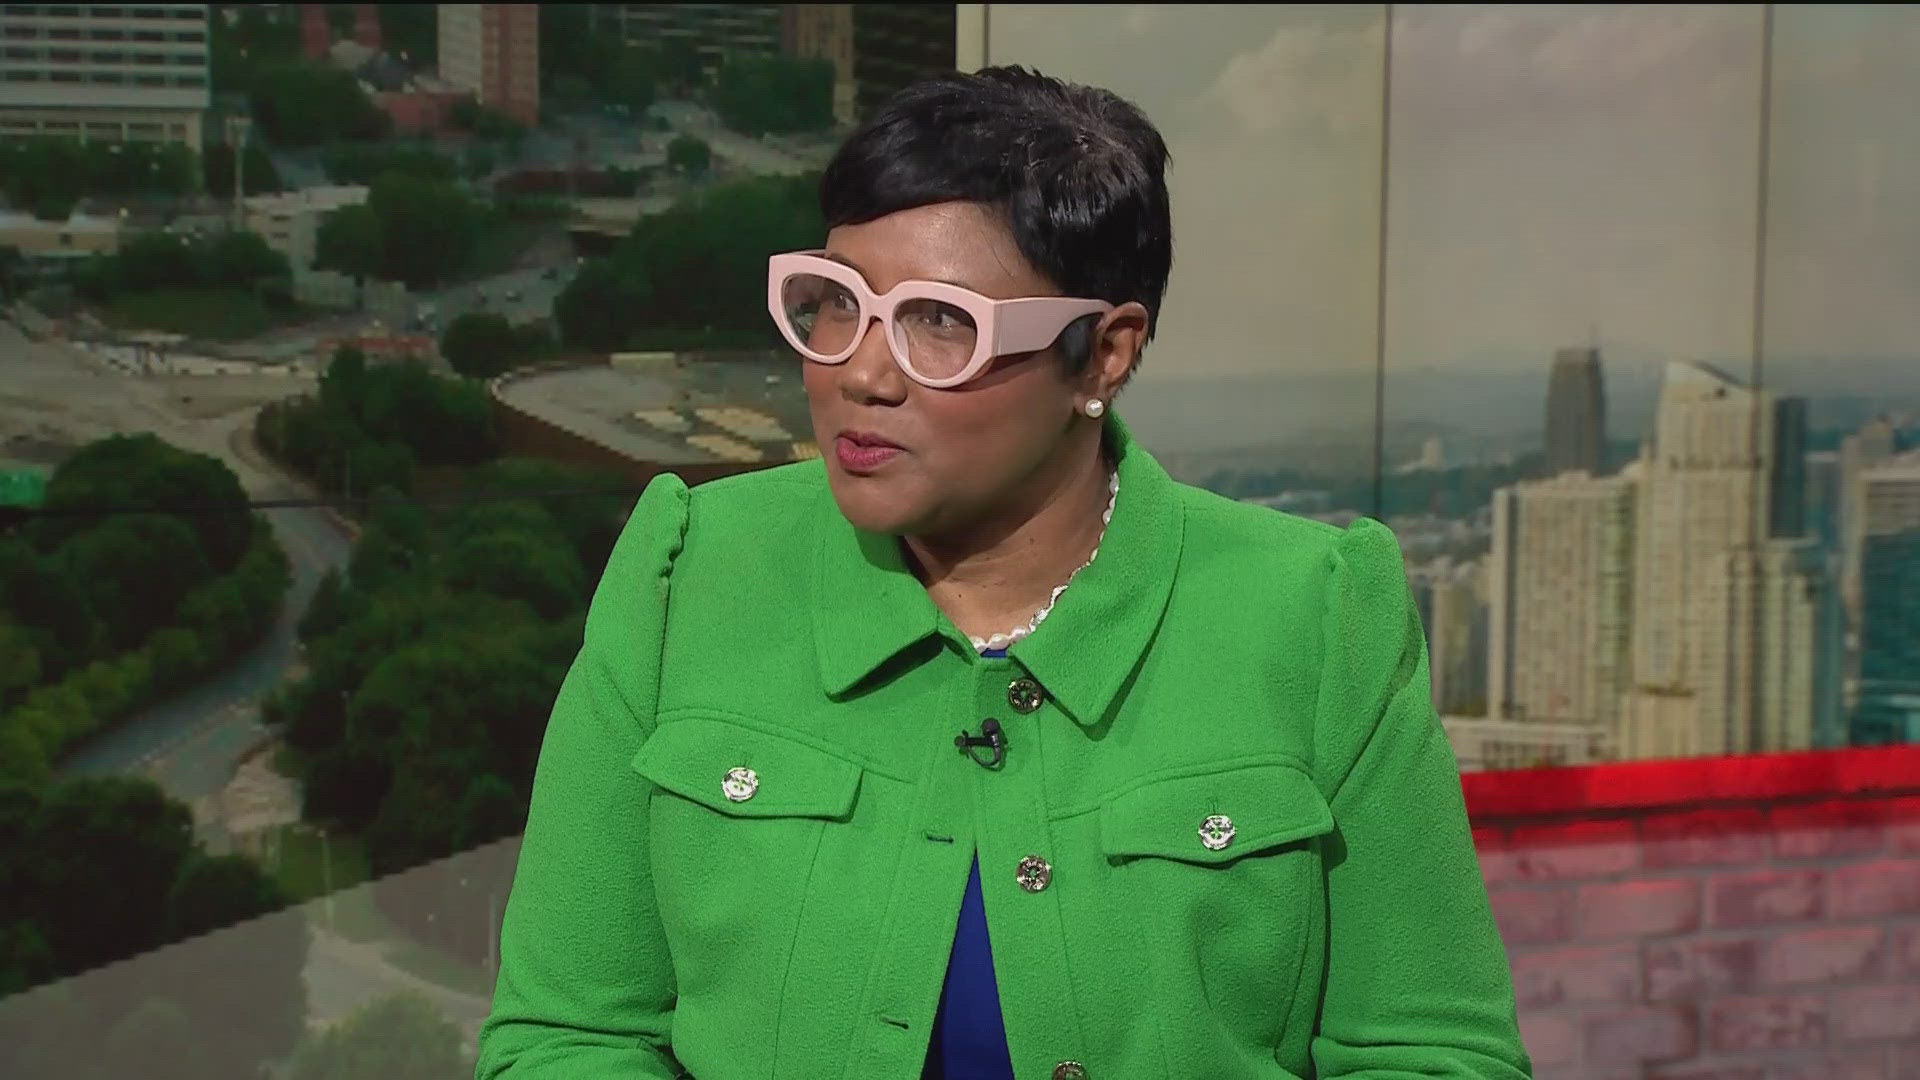 Lorraine Cochran-Johnson is set to make history as the first Black woman to be DeKalb County CEO. She shared her vision for the county with 11Alive.